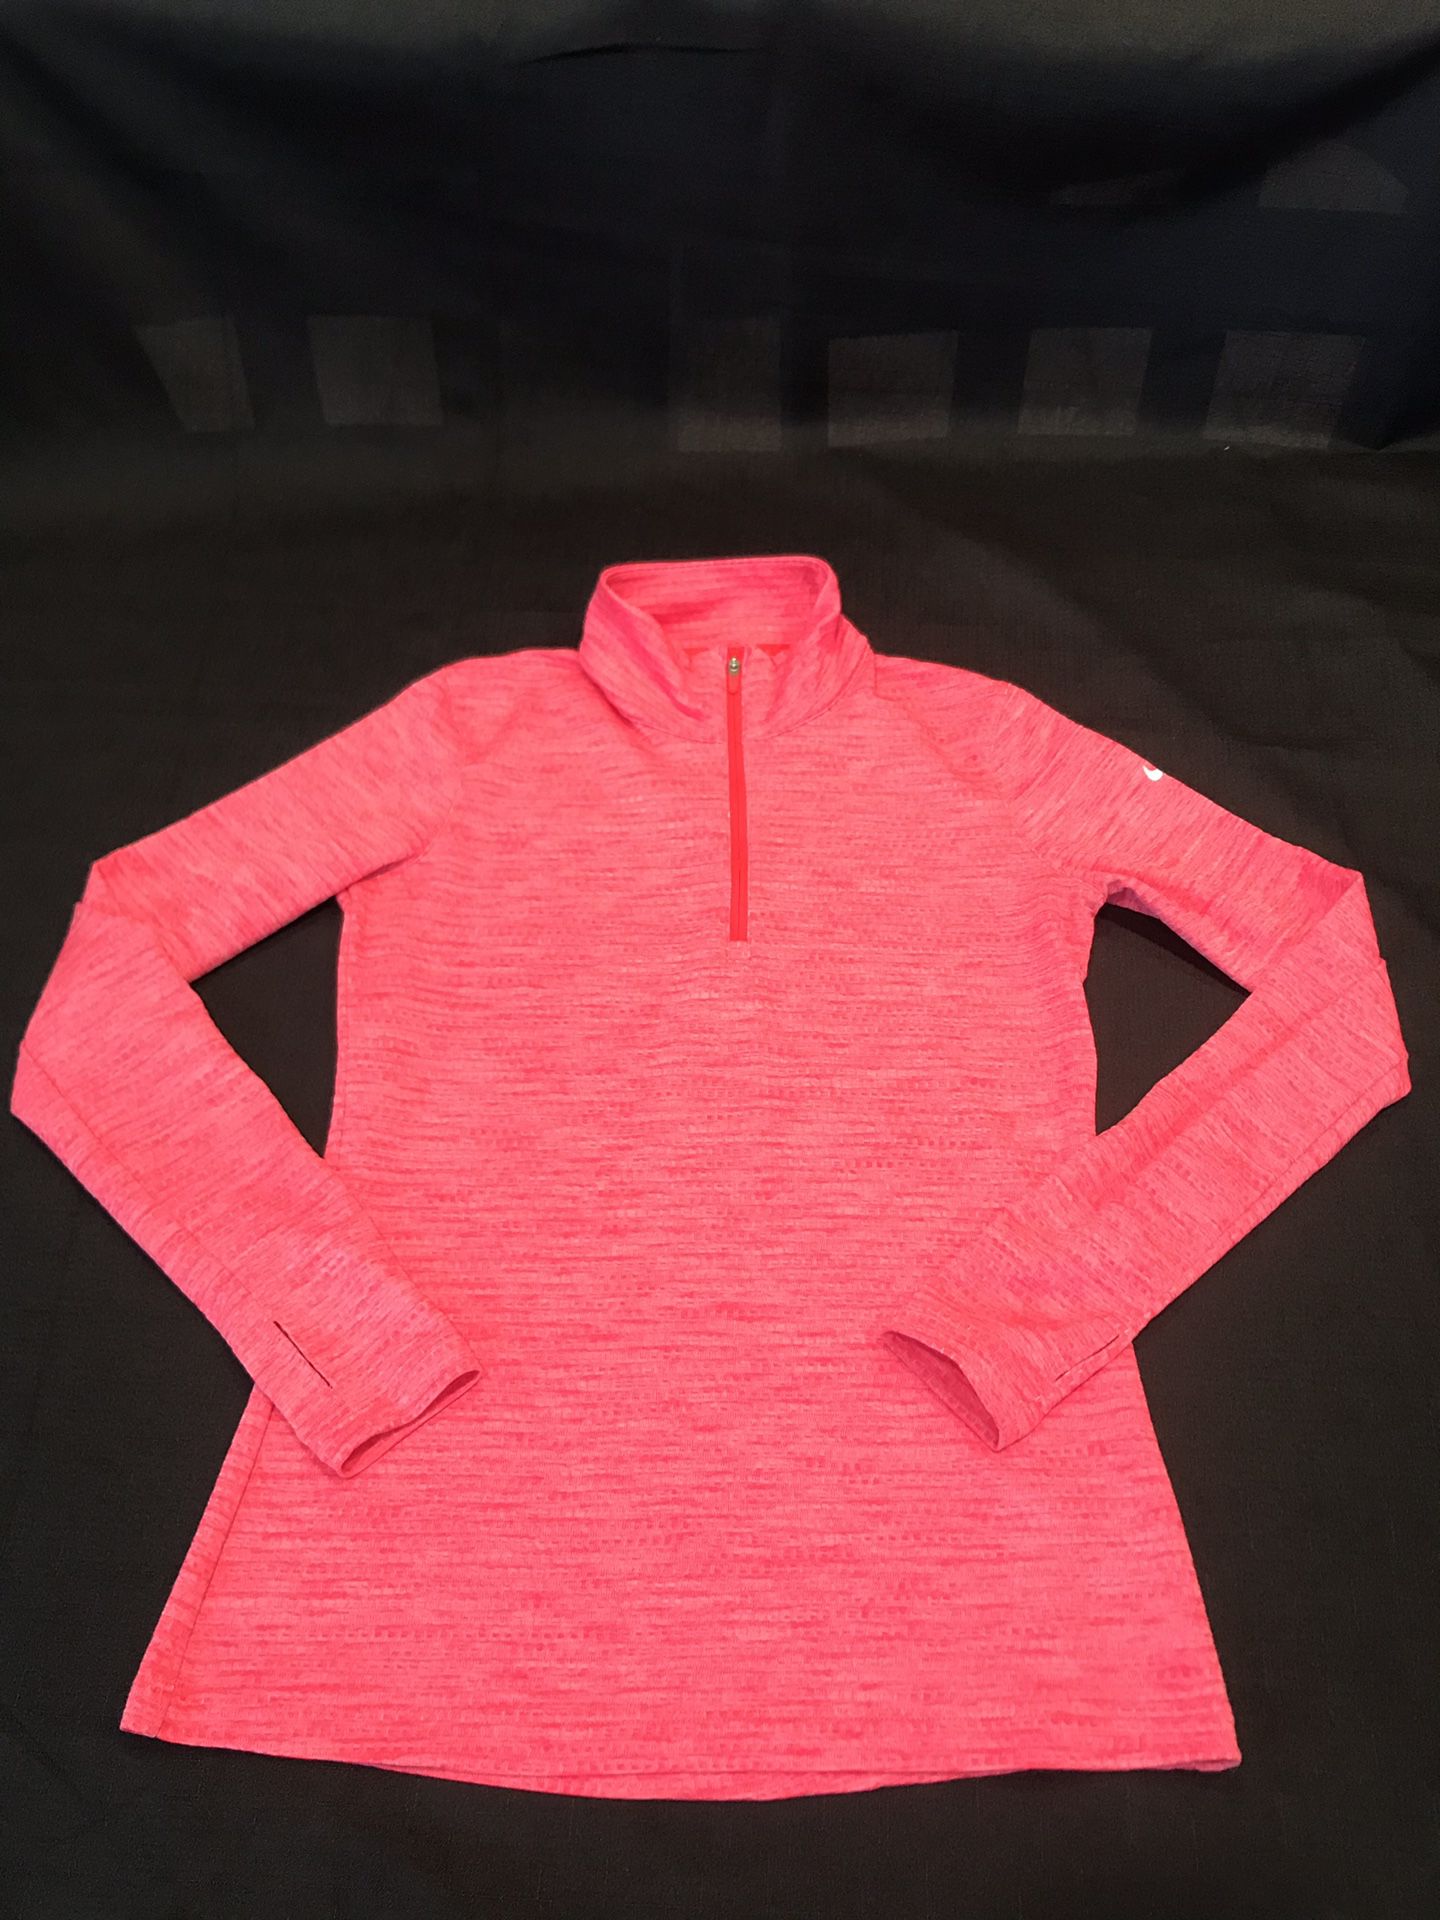 Nike Golf- Dry Fit women’s Hot pink long sleeve pullover 1/4 zip up